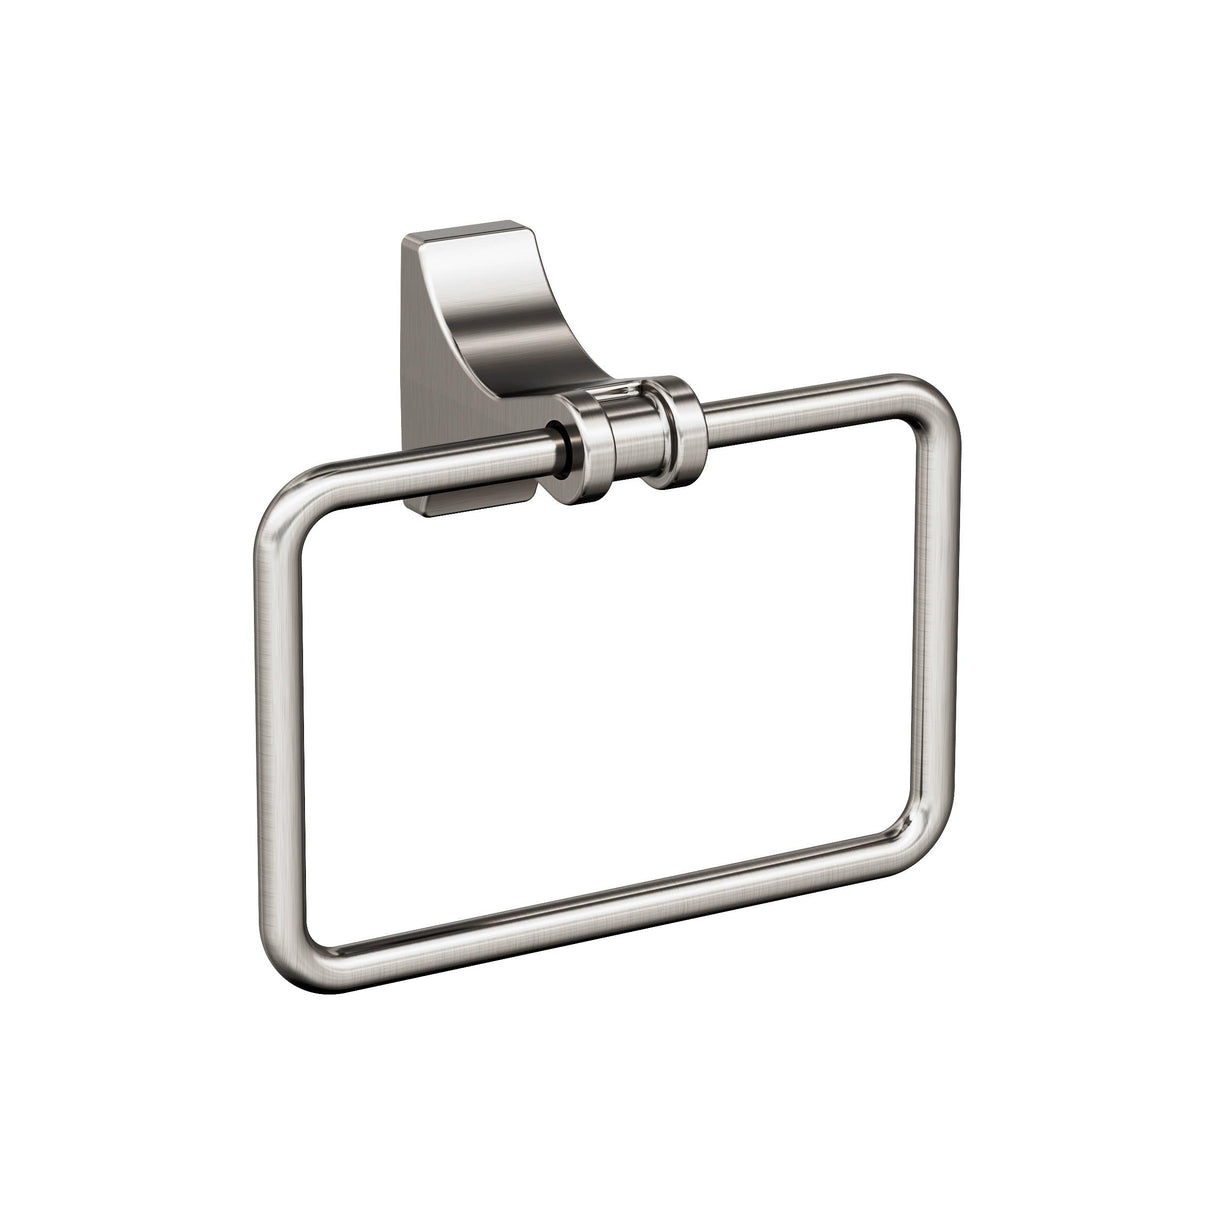 Amerock BH36052G10 Brushed Nickel Towel Ring 5-1/4 in (133 mm) Length Towel Holder Davenport Hand Towel Holder for Bathroom Wall Small Kitchen Towel Holder Bath Accessories